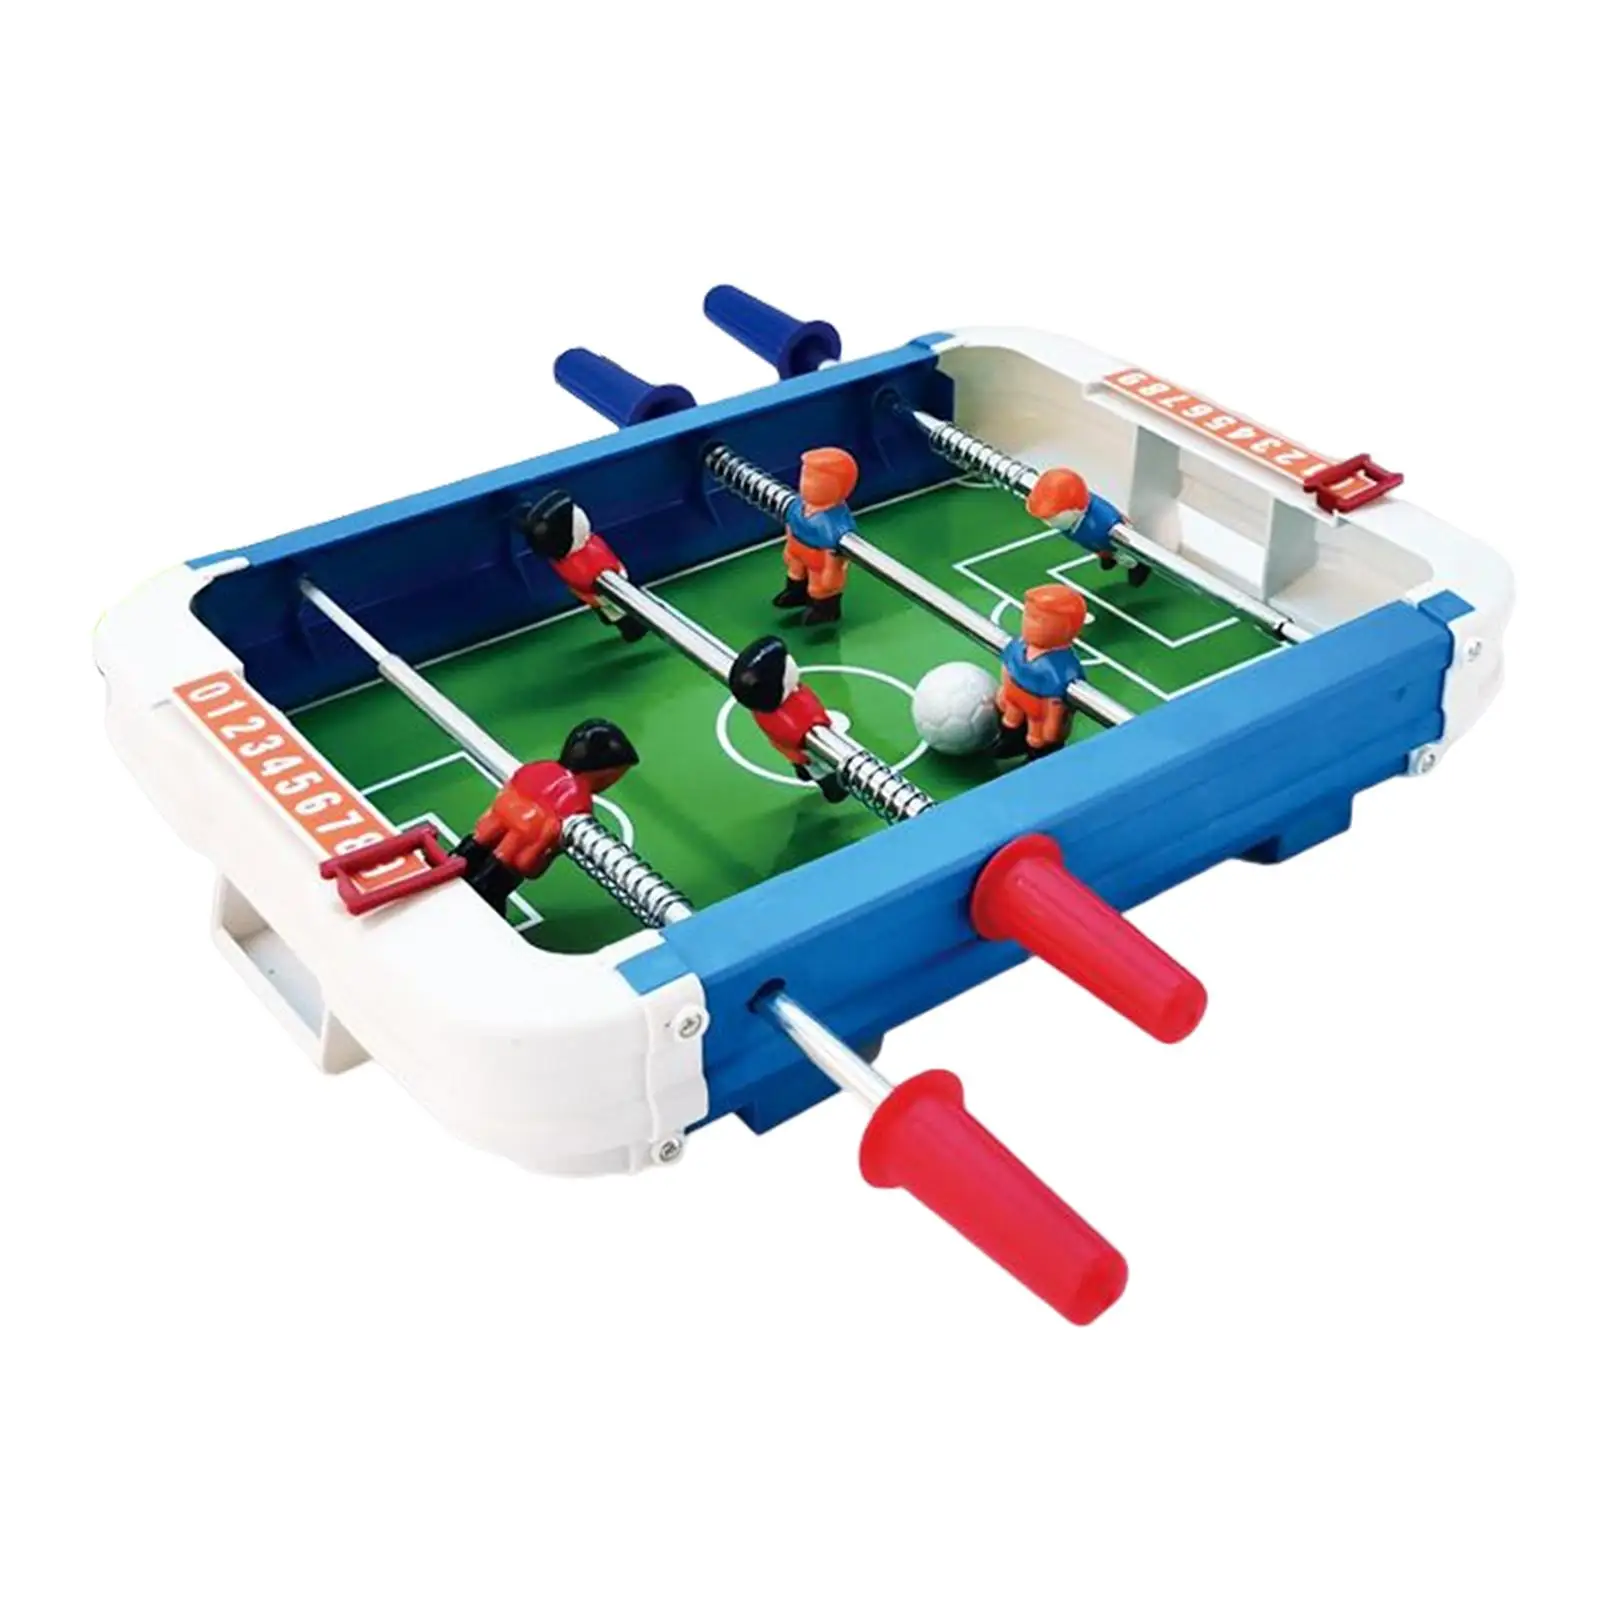 Portable Foosball Table, Table Top Football Game Educational Toys Tabletop Soccer Game for Adults Kids Boys Girls Birthday Gifts